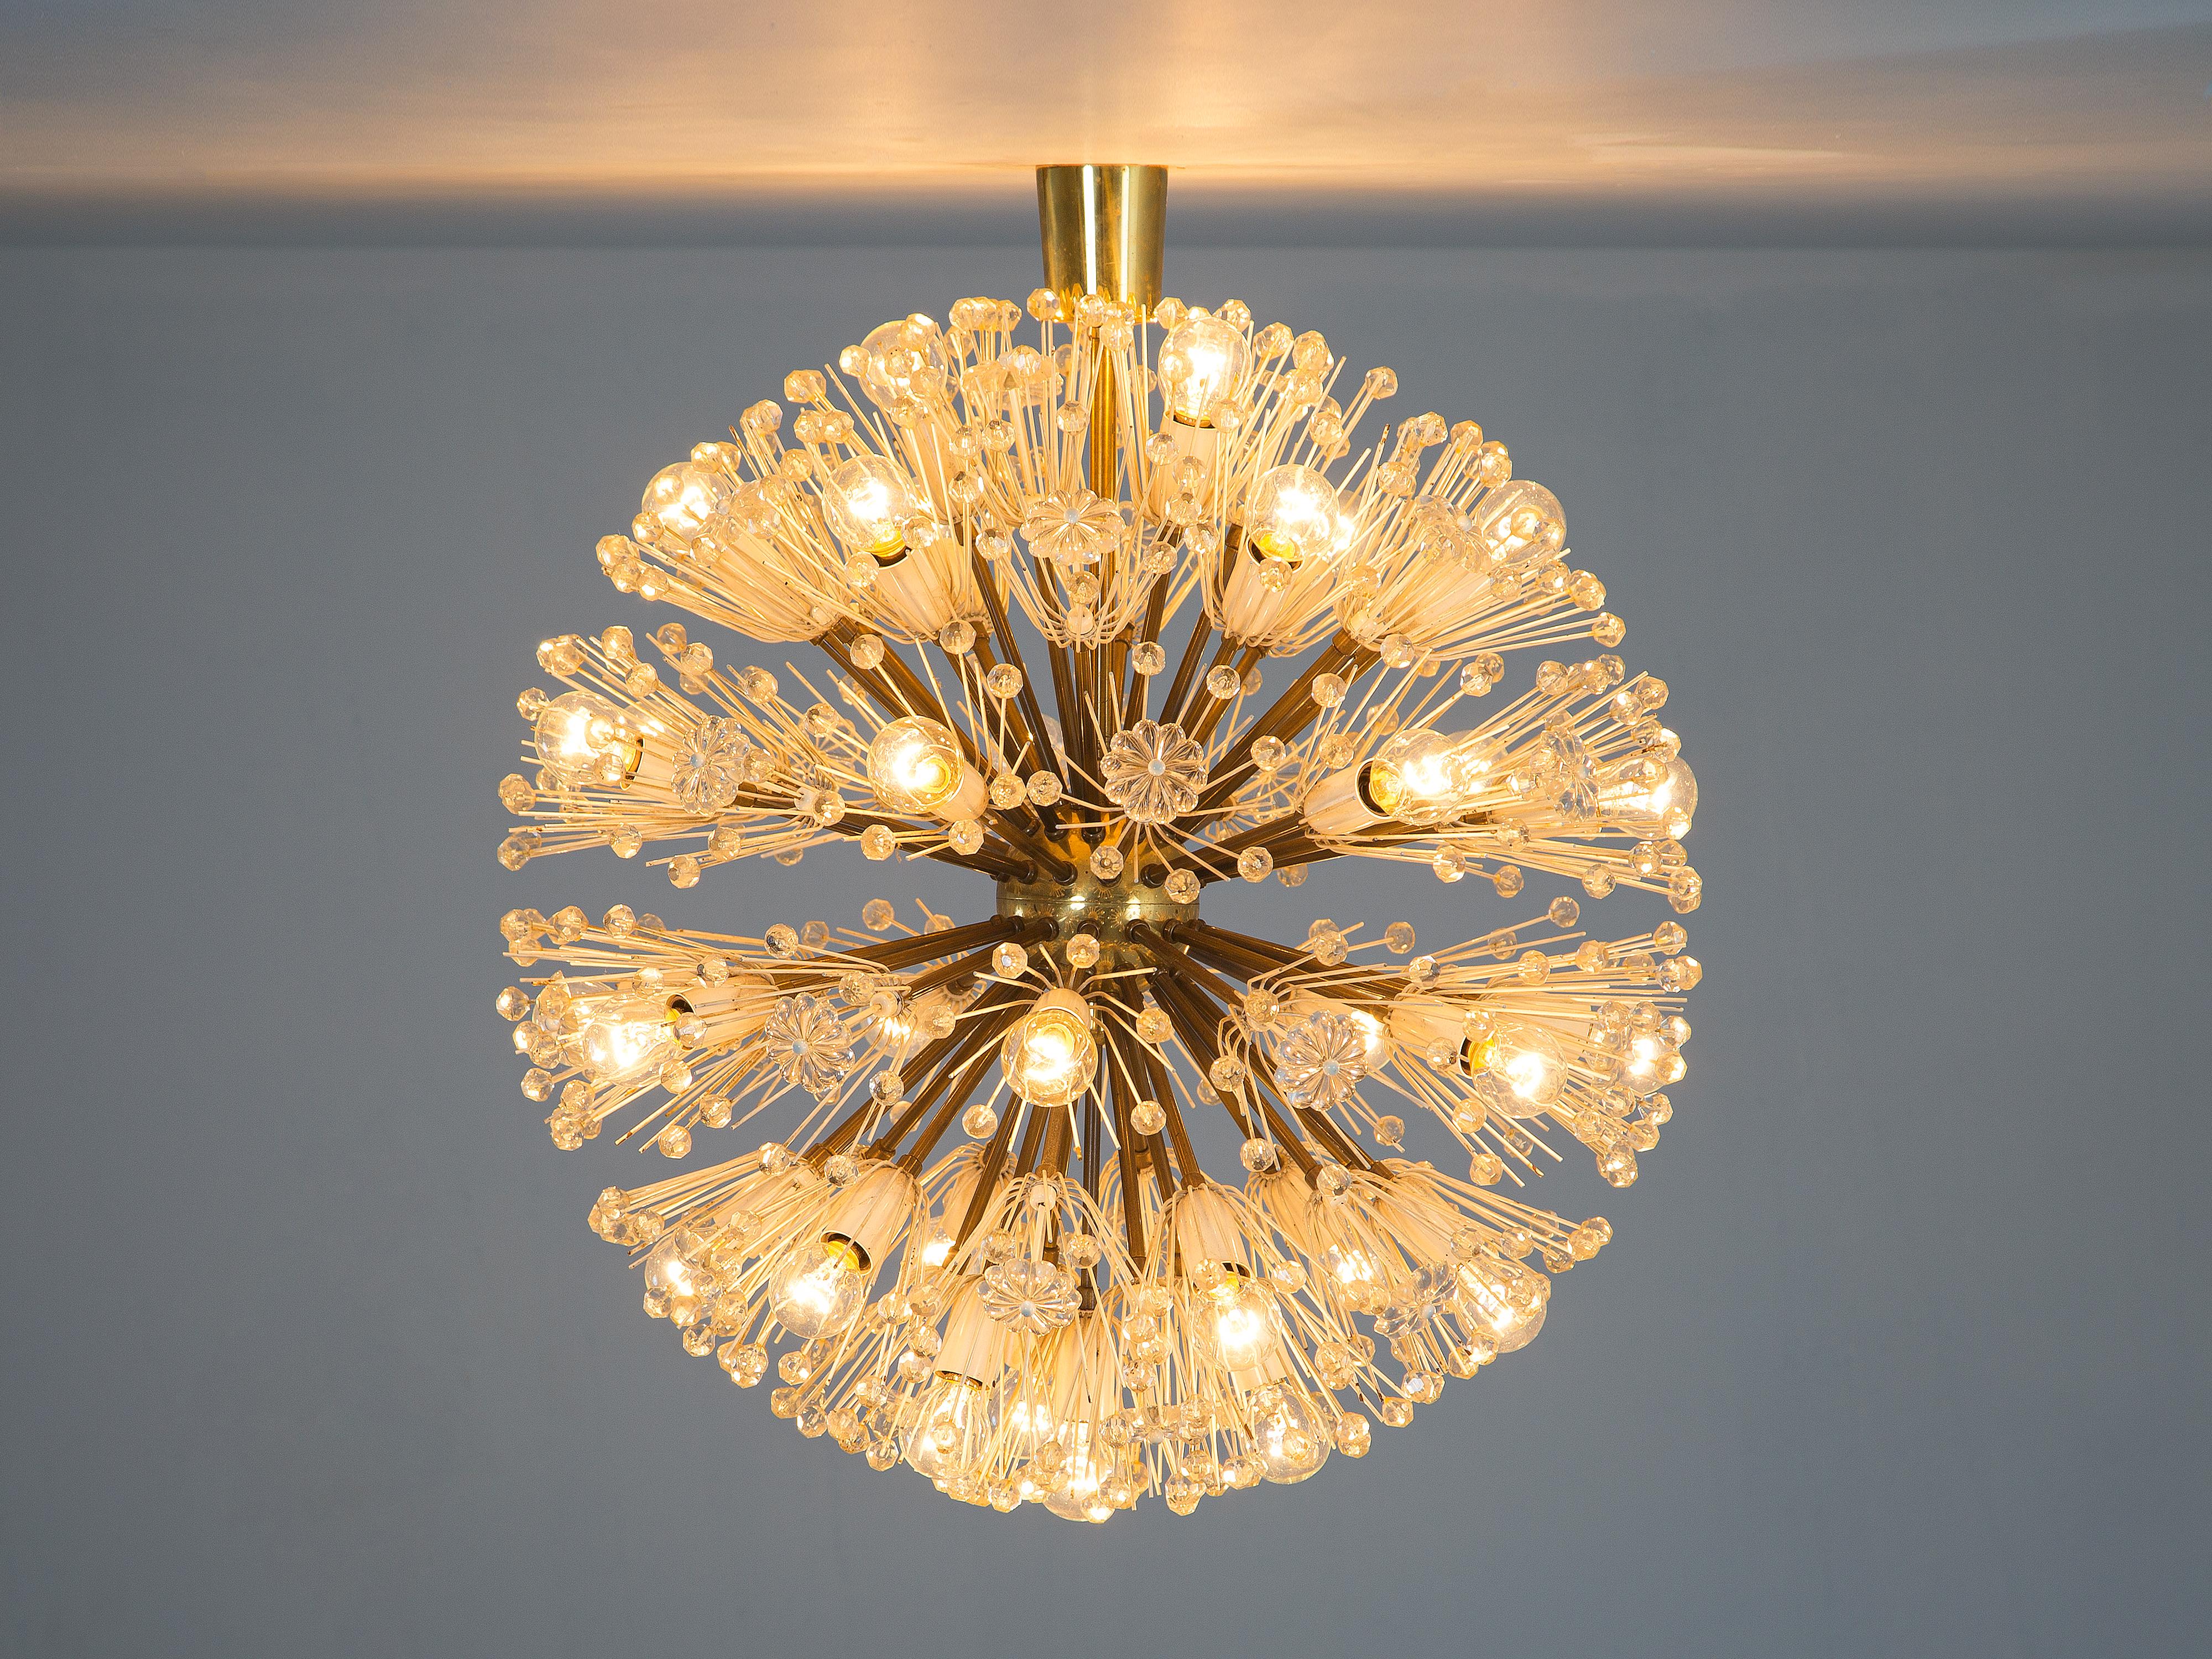 Emil Stejnar for Rupert Nikoll, Sputnik chandelier, brass, glass, Austria, 1960s 

Very rare large pendant light by Emil Stejnar. Round like a ball this 'Sputnik' chandelier consists out of a center sphere from which many rods with glass spheres at